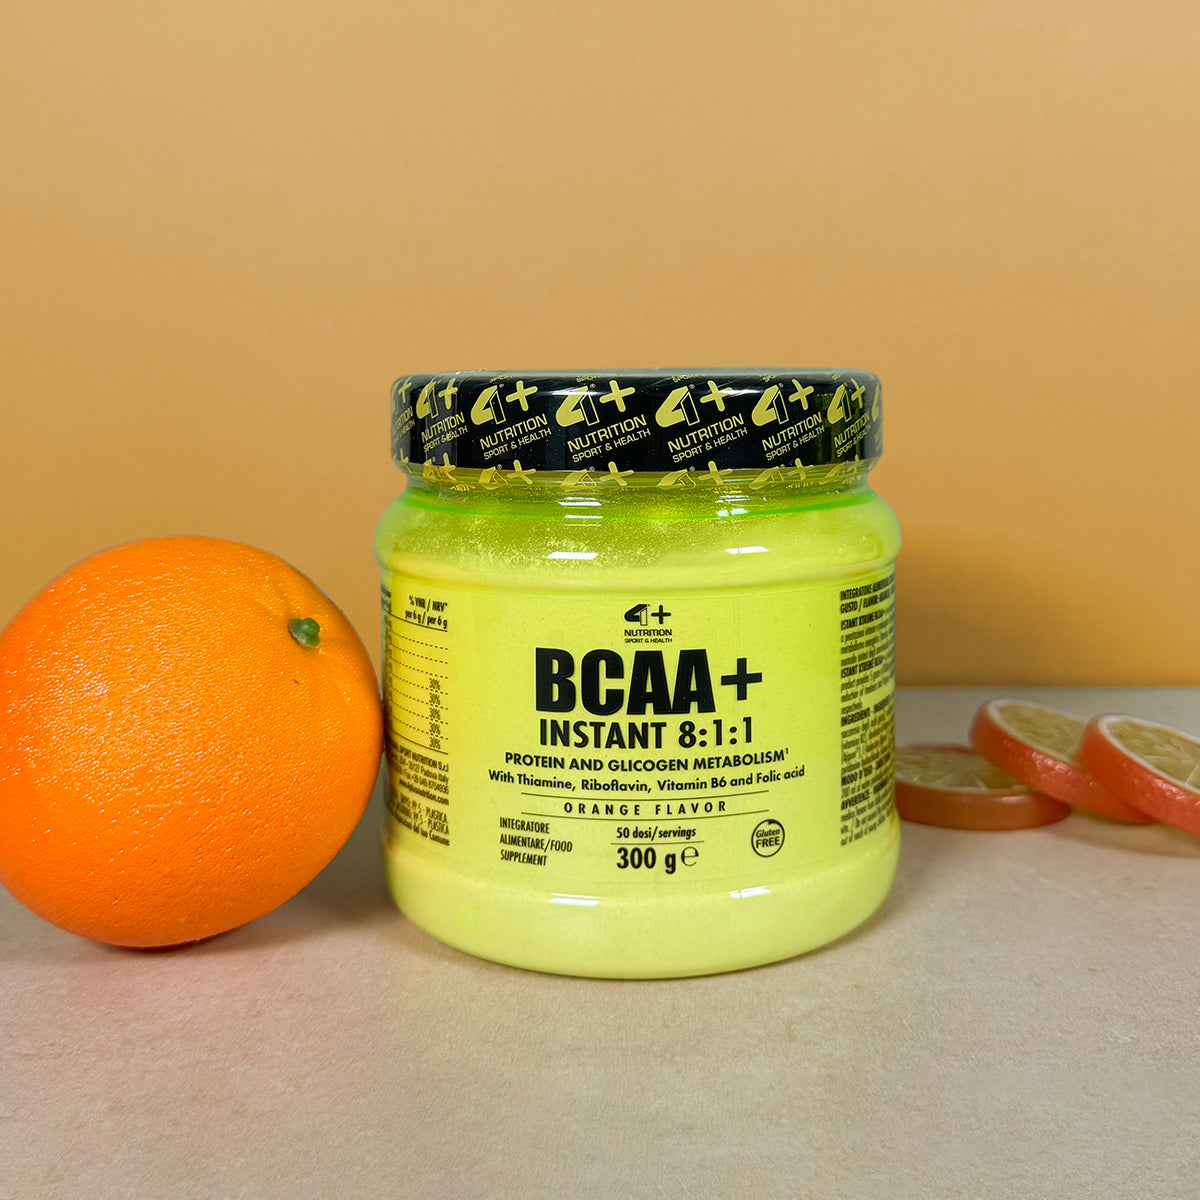 BCAA+ INSTANT 8:1:1